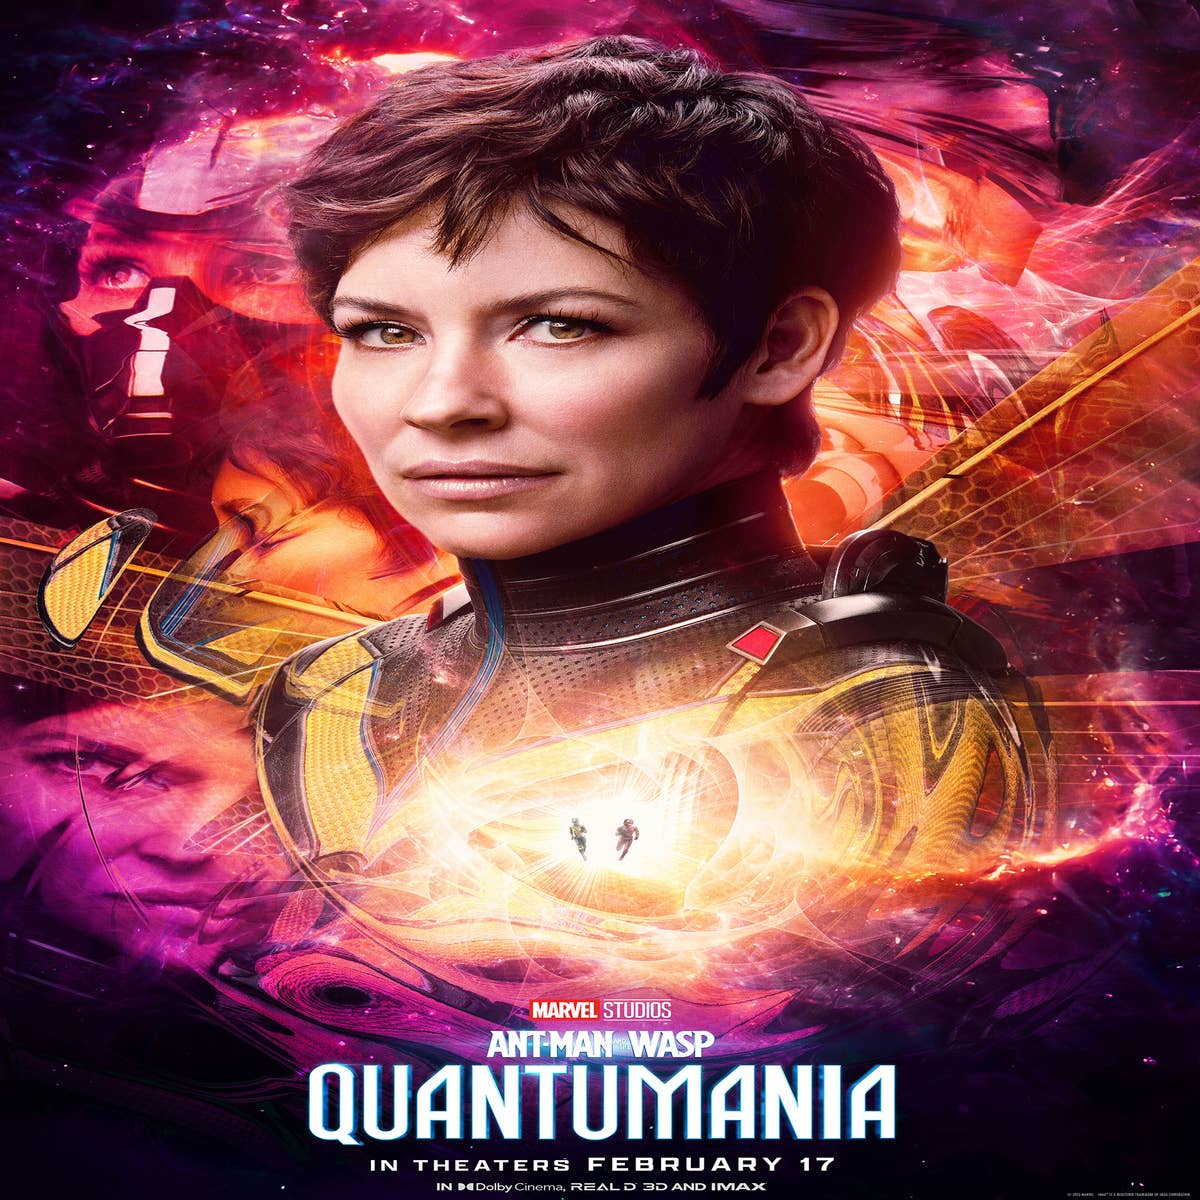 The Quantumania that wasn't: Jeff Loveness talks Ant-Man 3 deleted